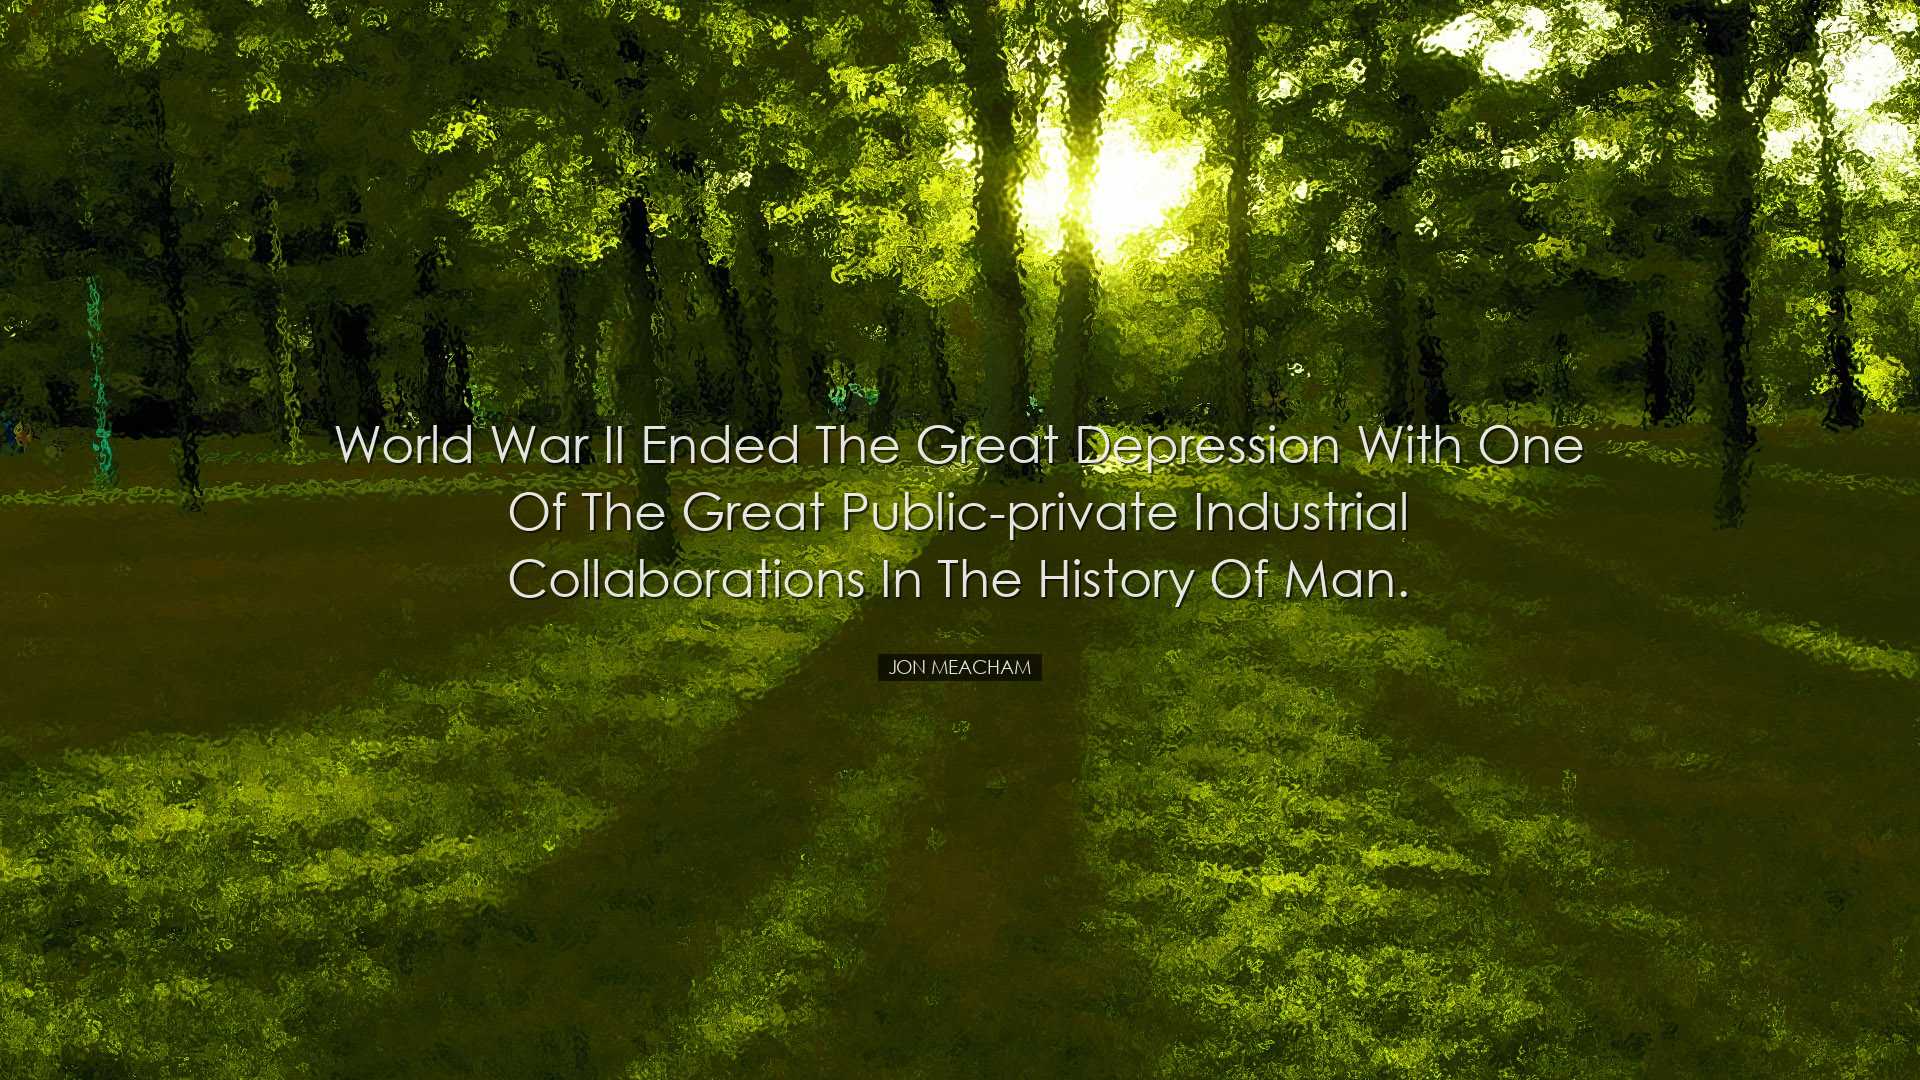 World War II ended the Great Depression with one of the great publ